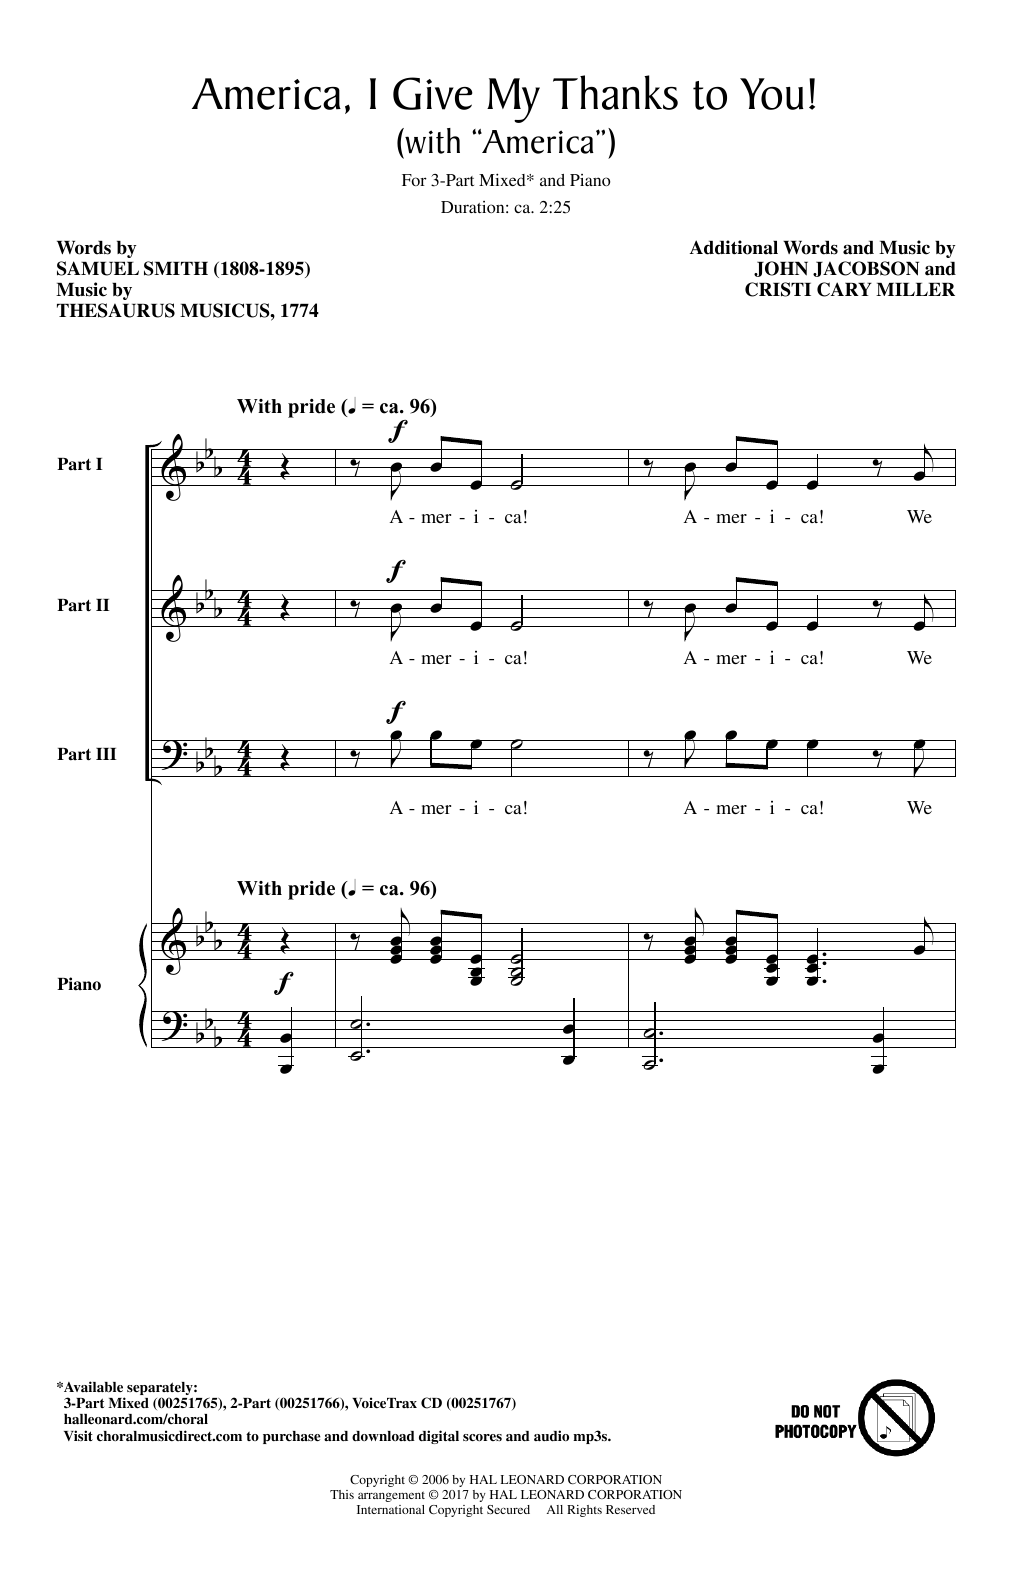 Download Cristi Cary Miller America, I Give My Thanks To You! Sheet Music